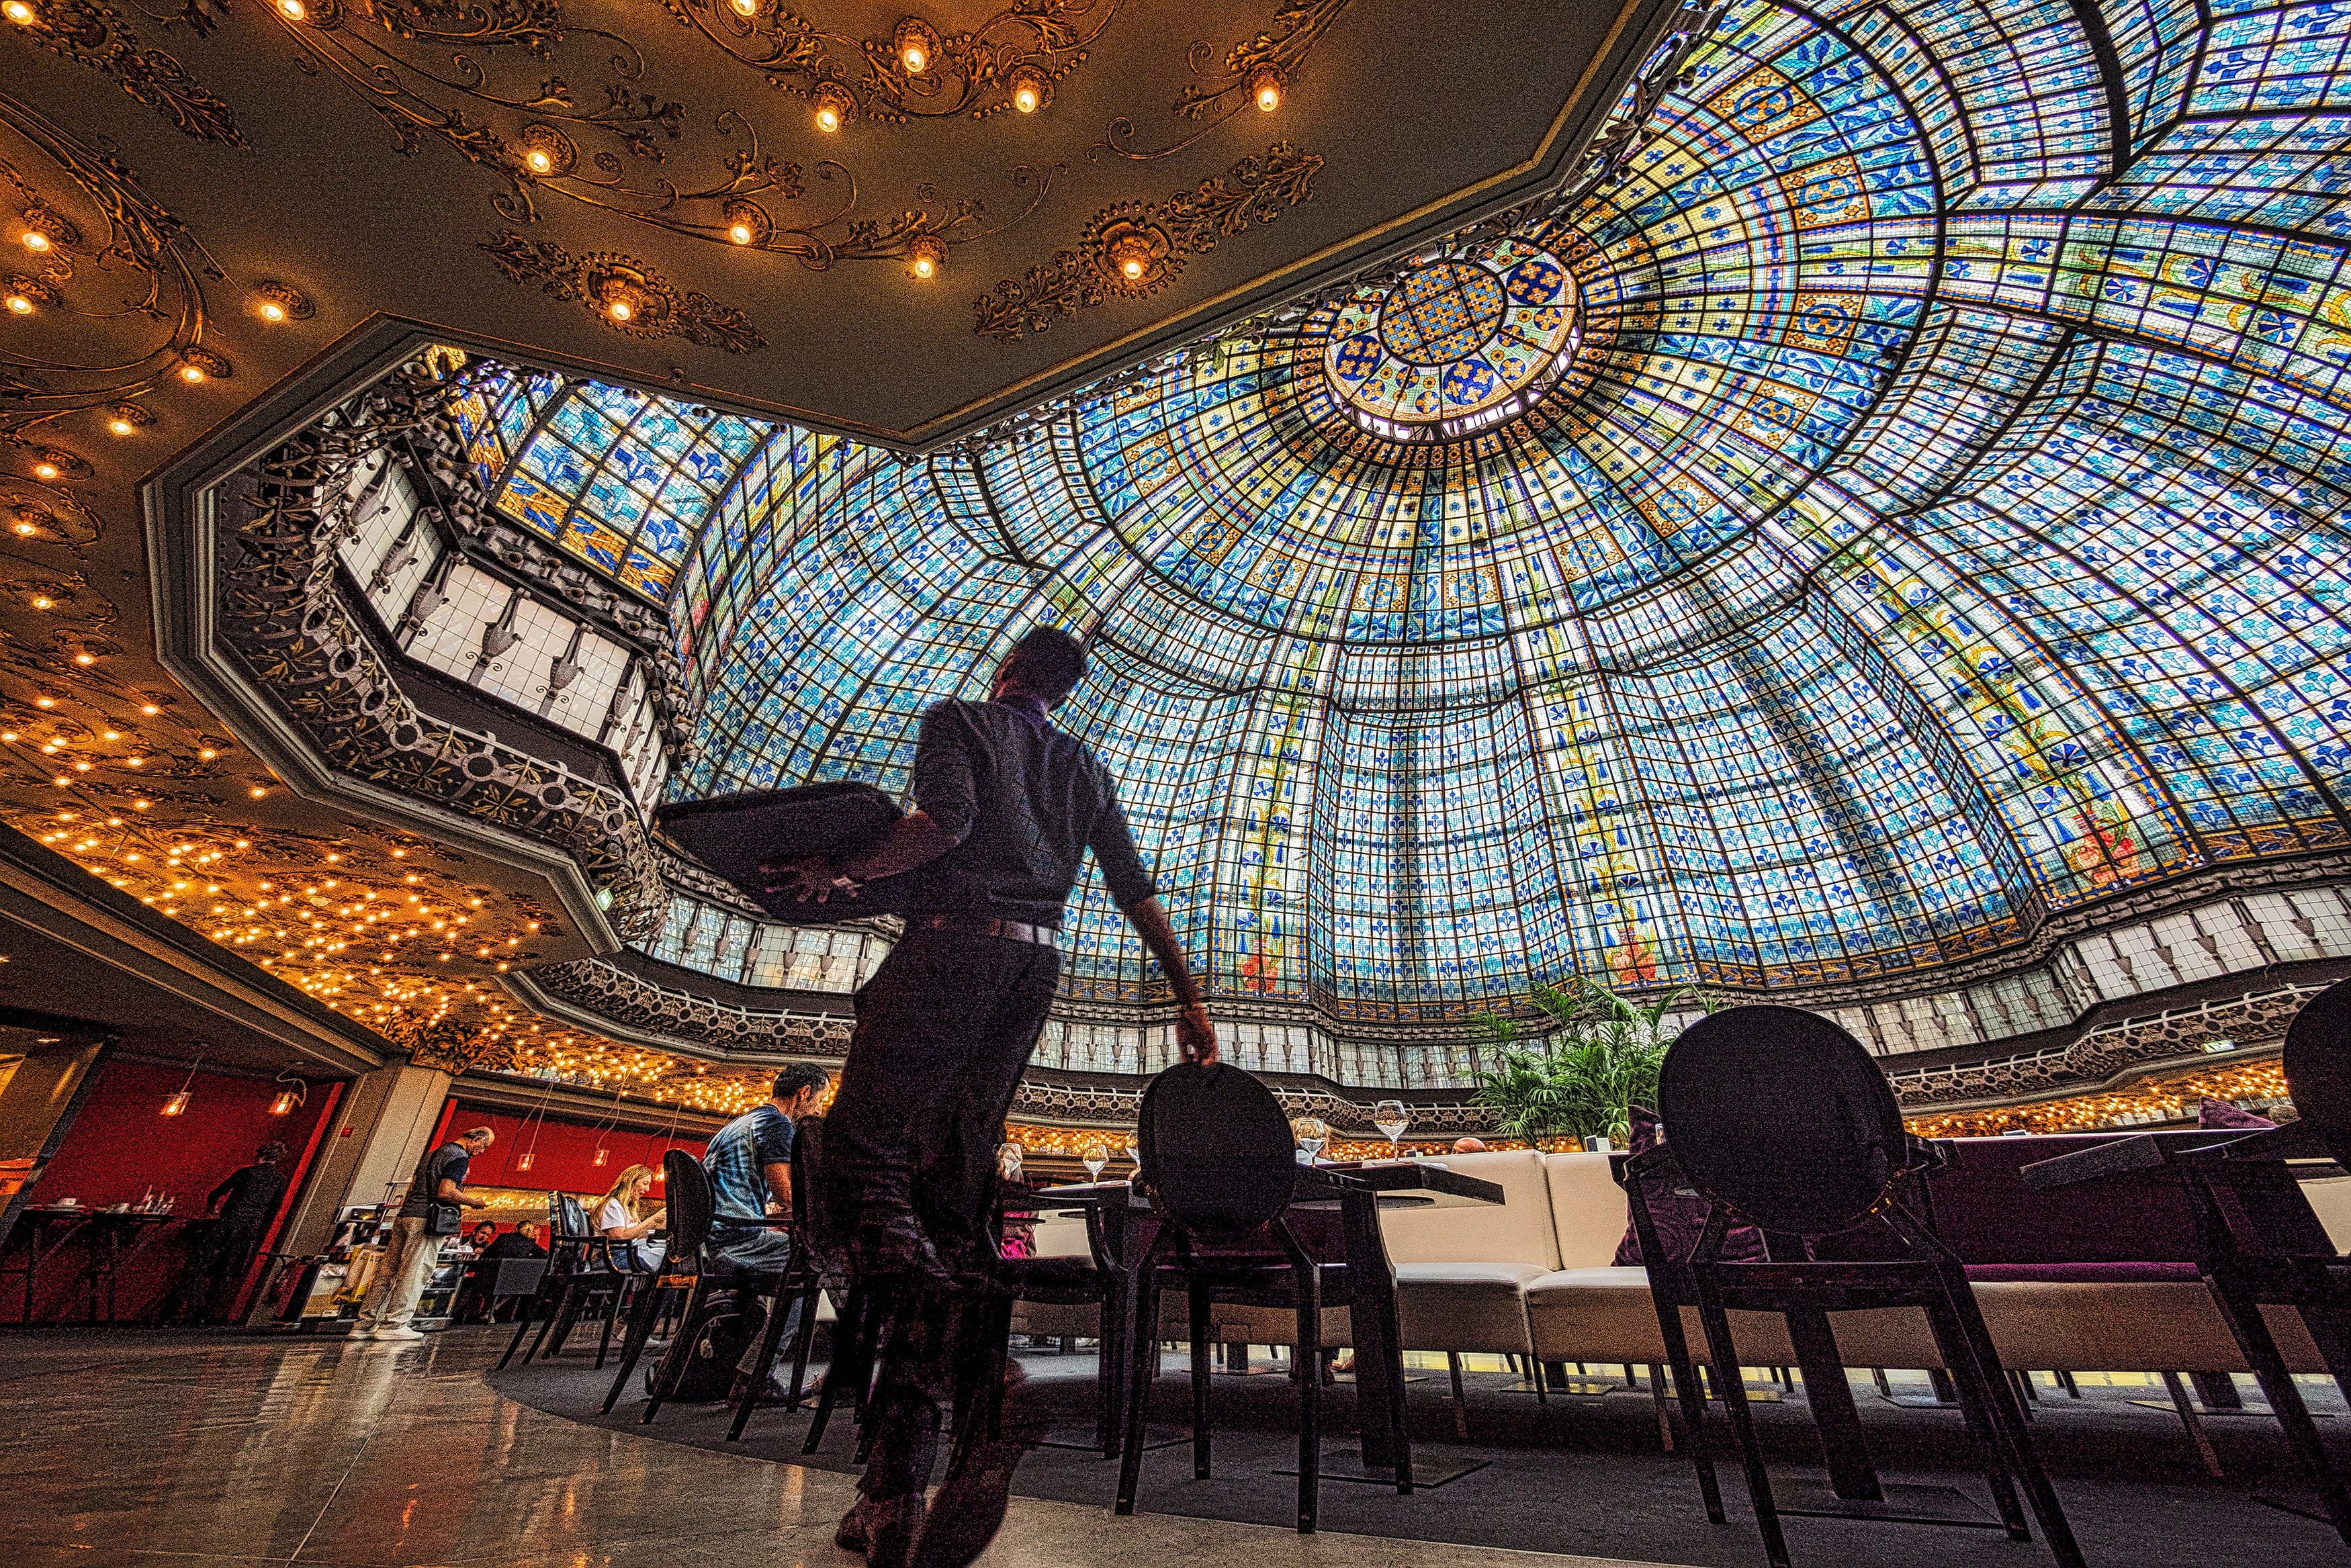 The cupola dome of Galeries Lafayette in Paris, France